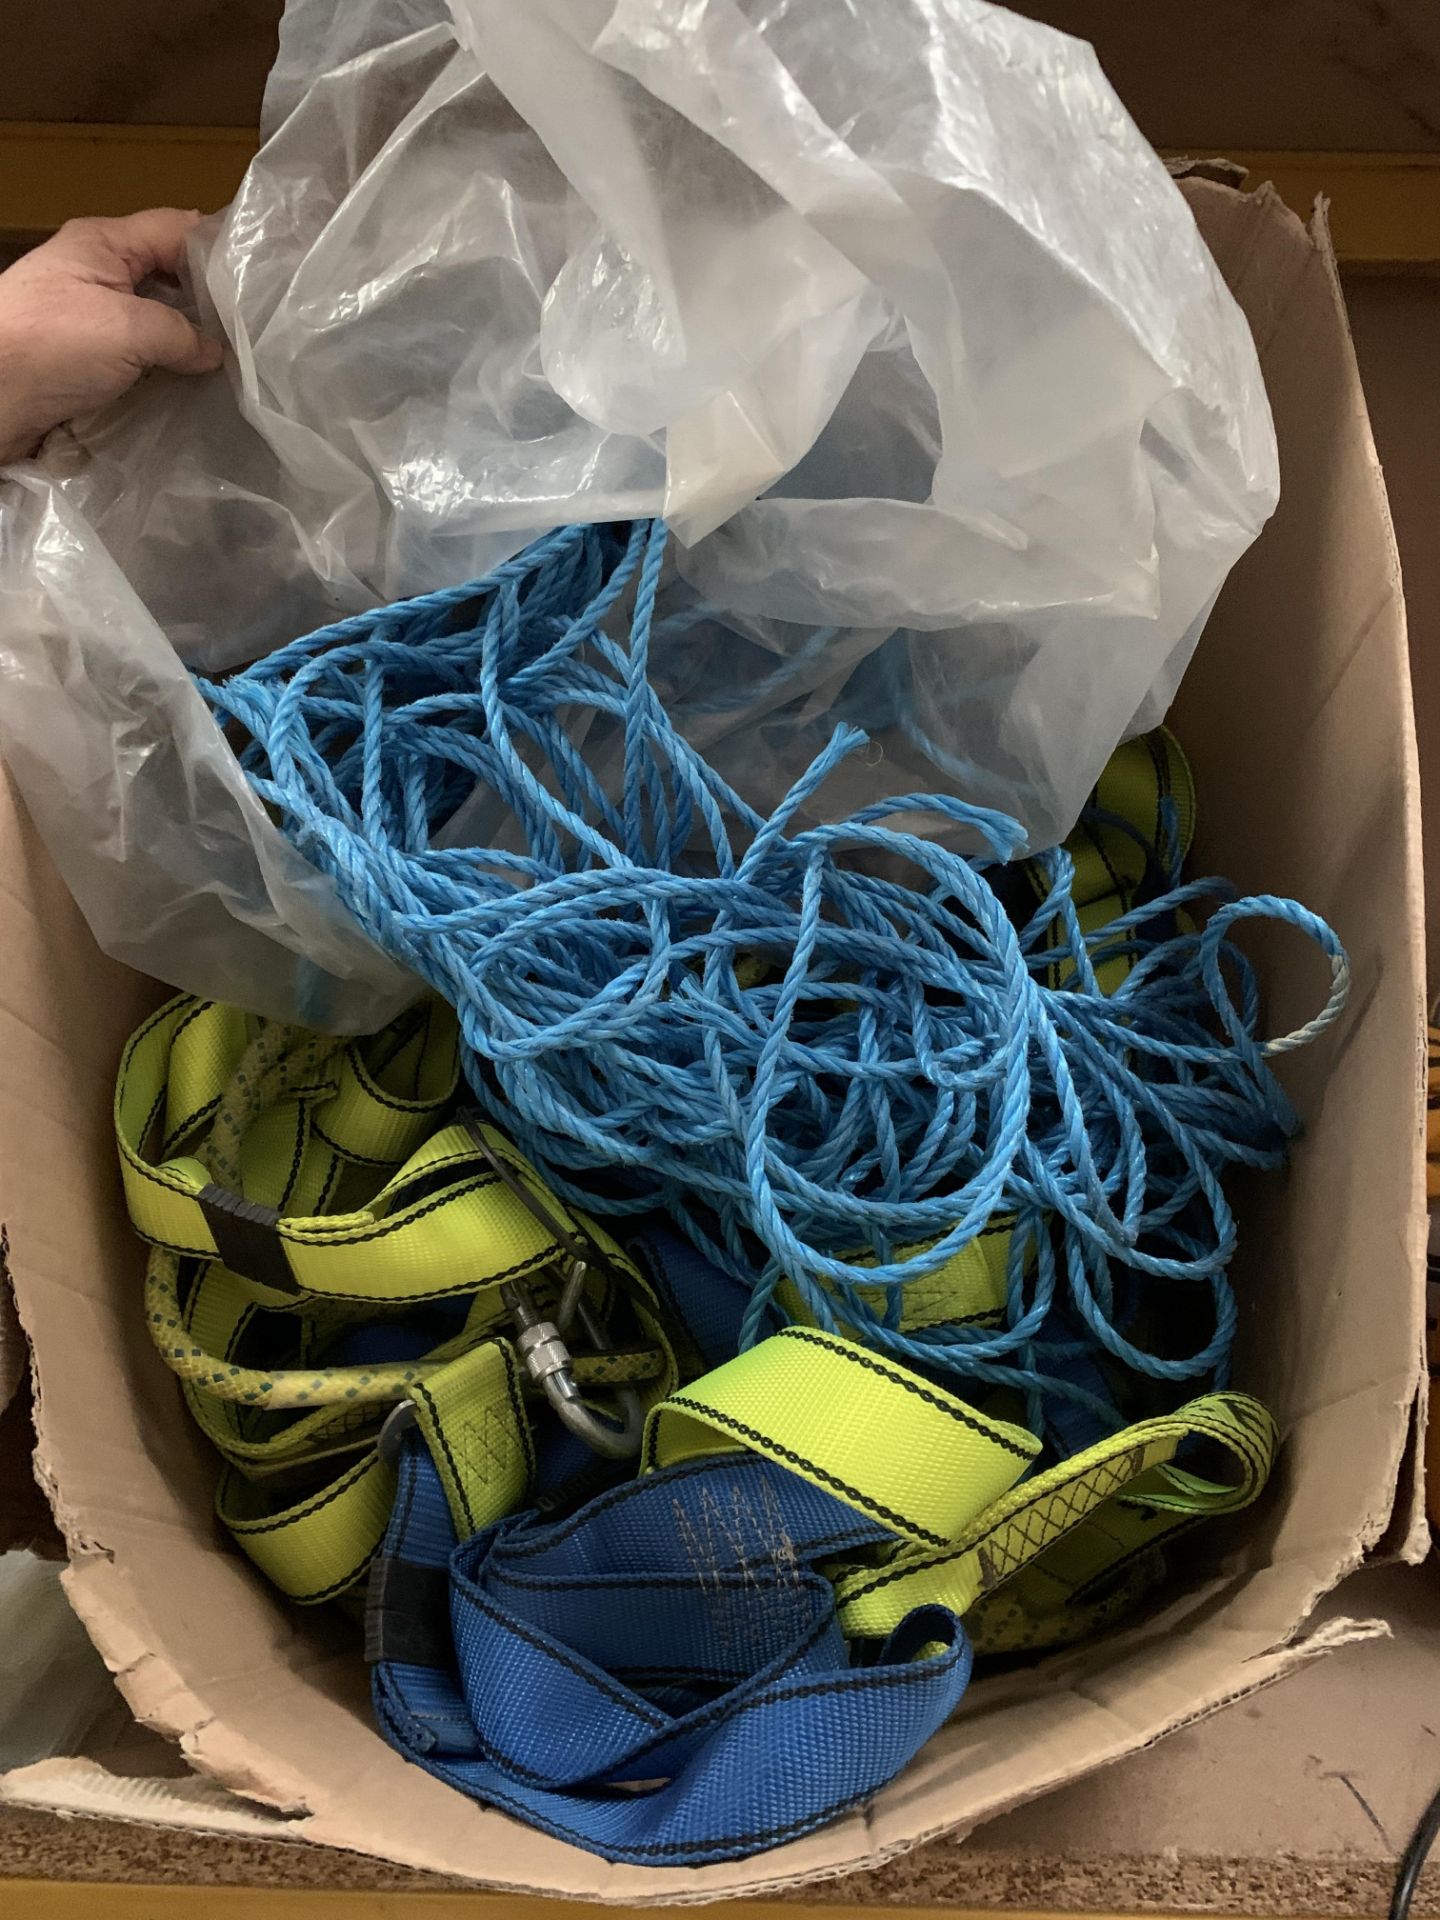 Contents to box - 5 assorted used safety harnesses and lanyards, quantity of blue nylon rope etc.